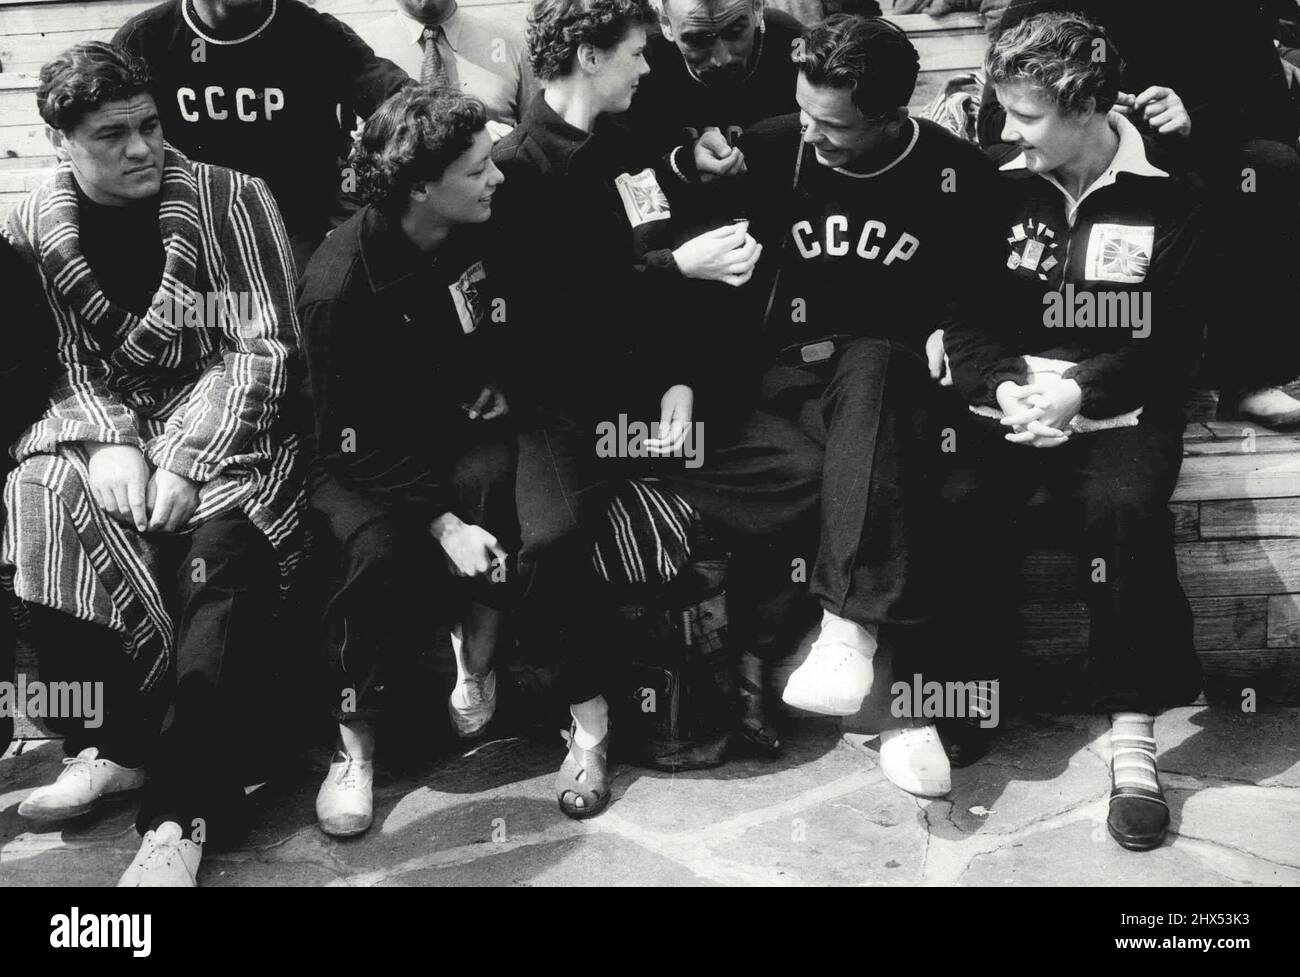 Halsinki Badge-Swappers - Badge-Swapping at the Olympic pool. Left to right: 15-year-old Pauline Musgrove, of York, youngest member of the British team, Jean Wrigley, of Oldham, Vadim Bubok, of the Russian polo team, Jean Botham, of Manchester, and other Russian polo players looking on. Latest craze among competitors at the Olympic games in Helsinki is Badge-swapping. Enthusiastic devotees of the Fad are the Russian Athletes, who now have many foreign Badges in their collections. July 23, 1952. (Photo by Paul Popper). Stock Photo